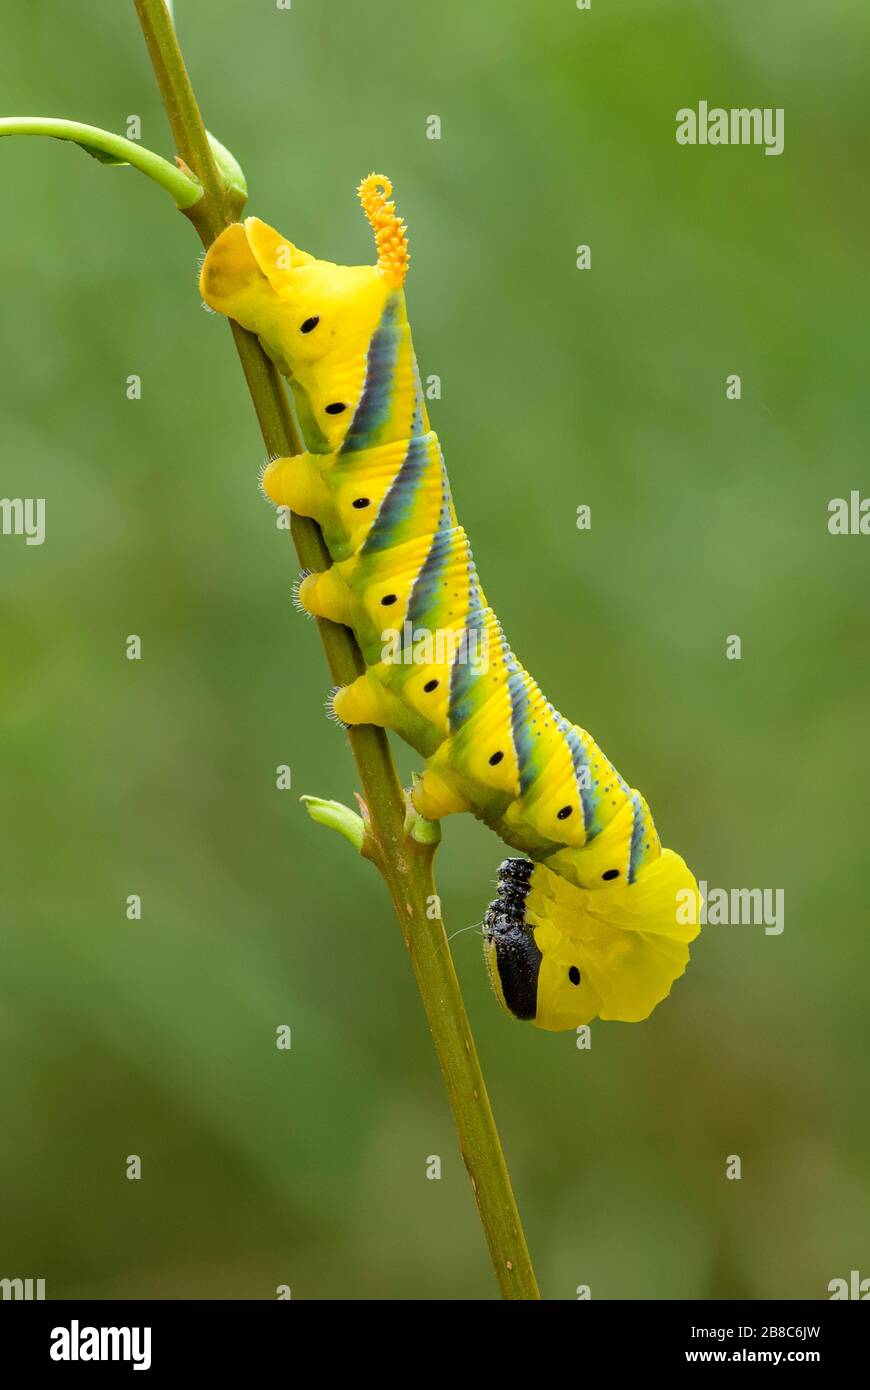 Lesser death's head hawkmoth caterpillar - Acherontia styx, iconic hawkmoth from Asian forests and woodlands, China. Stock Photo